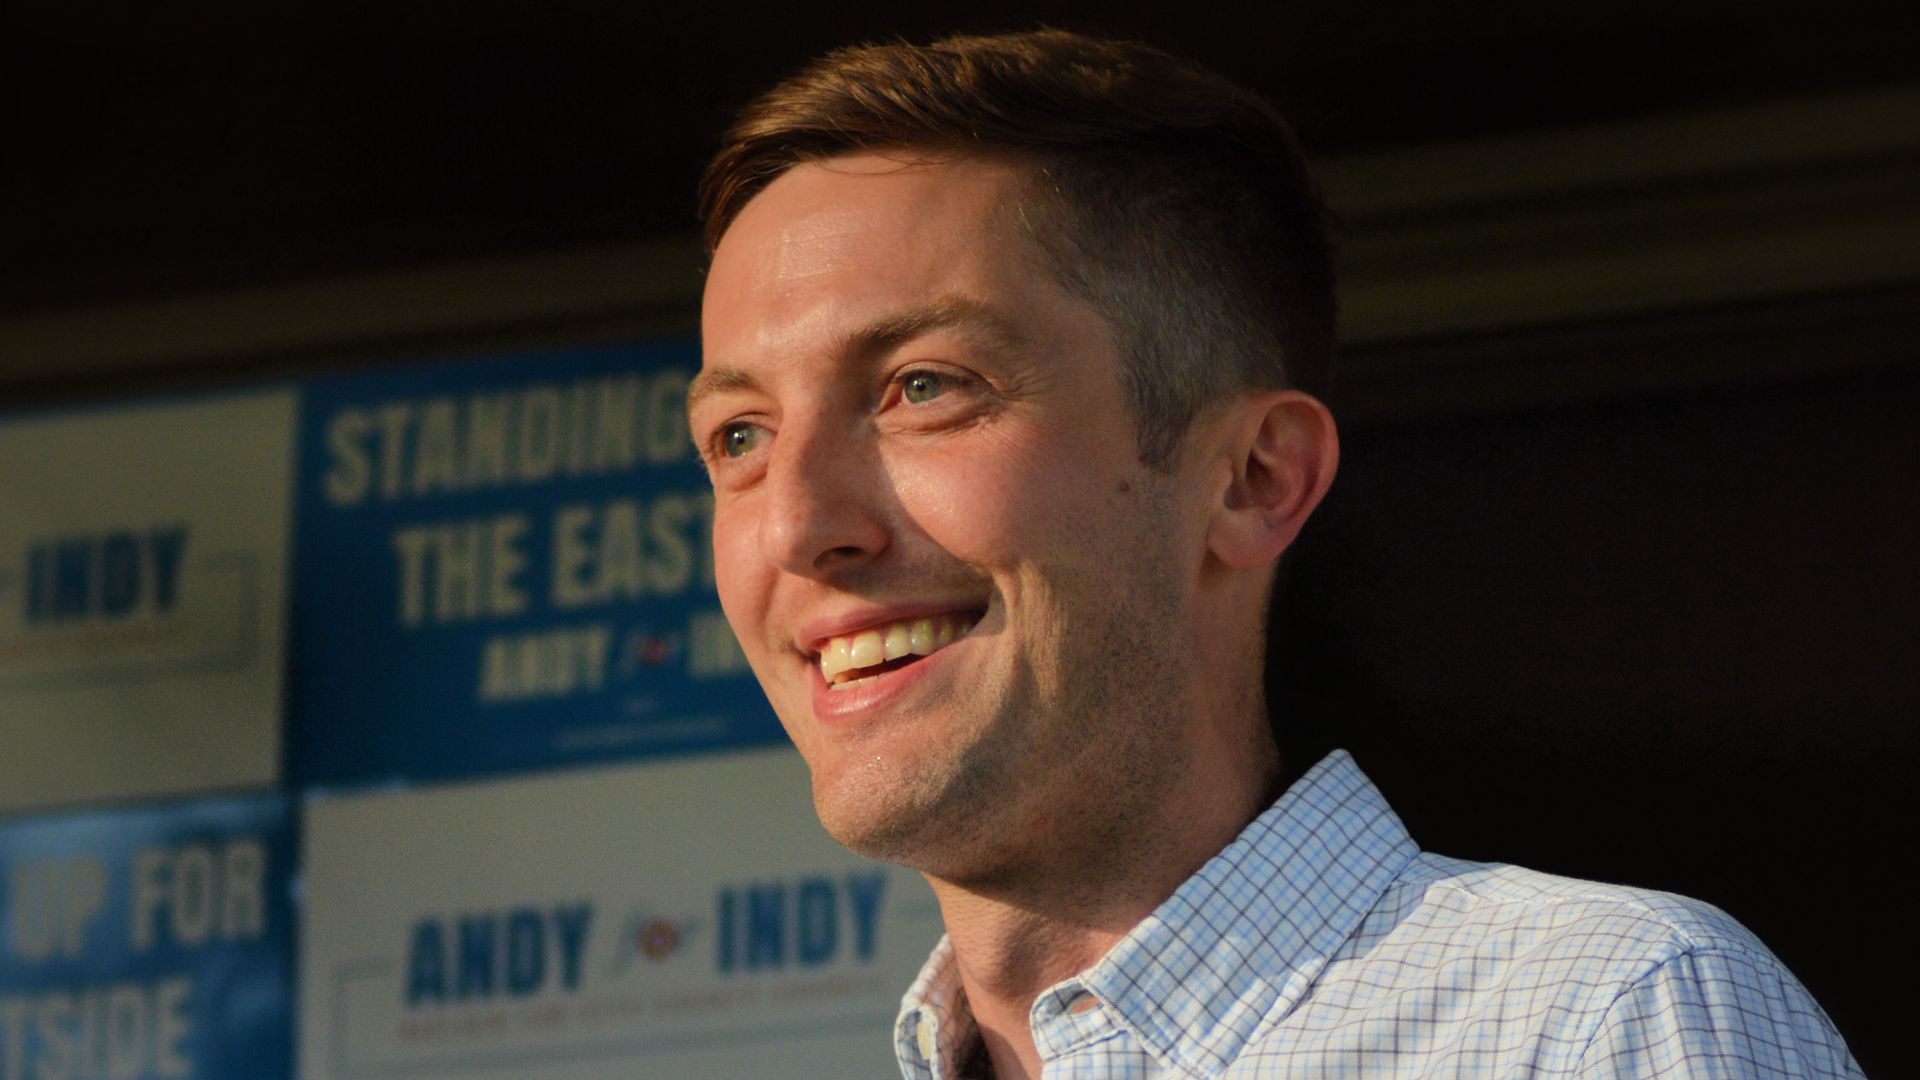 A photo of Andy Nielsen speaking at a campaign event.